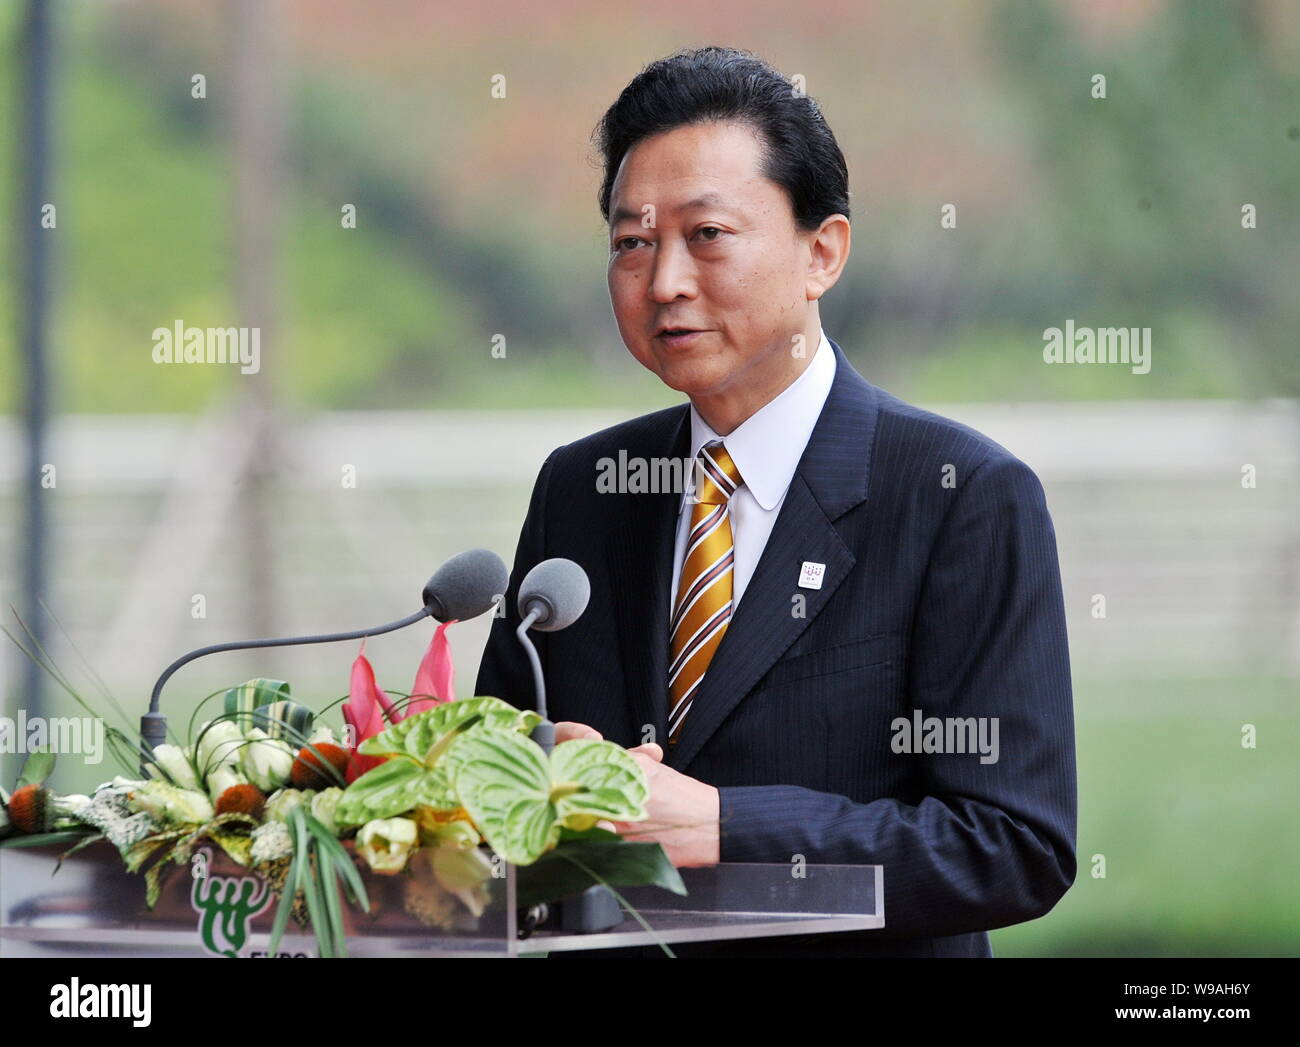 Former Japanese Prime Minister Yukio Hatoyama speaks during an event celebrating the Japan Pavilion Day in the Expo site in Shanghai, China, June 12, Stock Photo